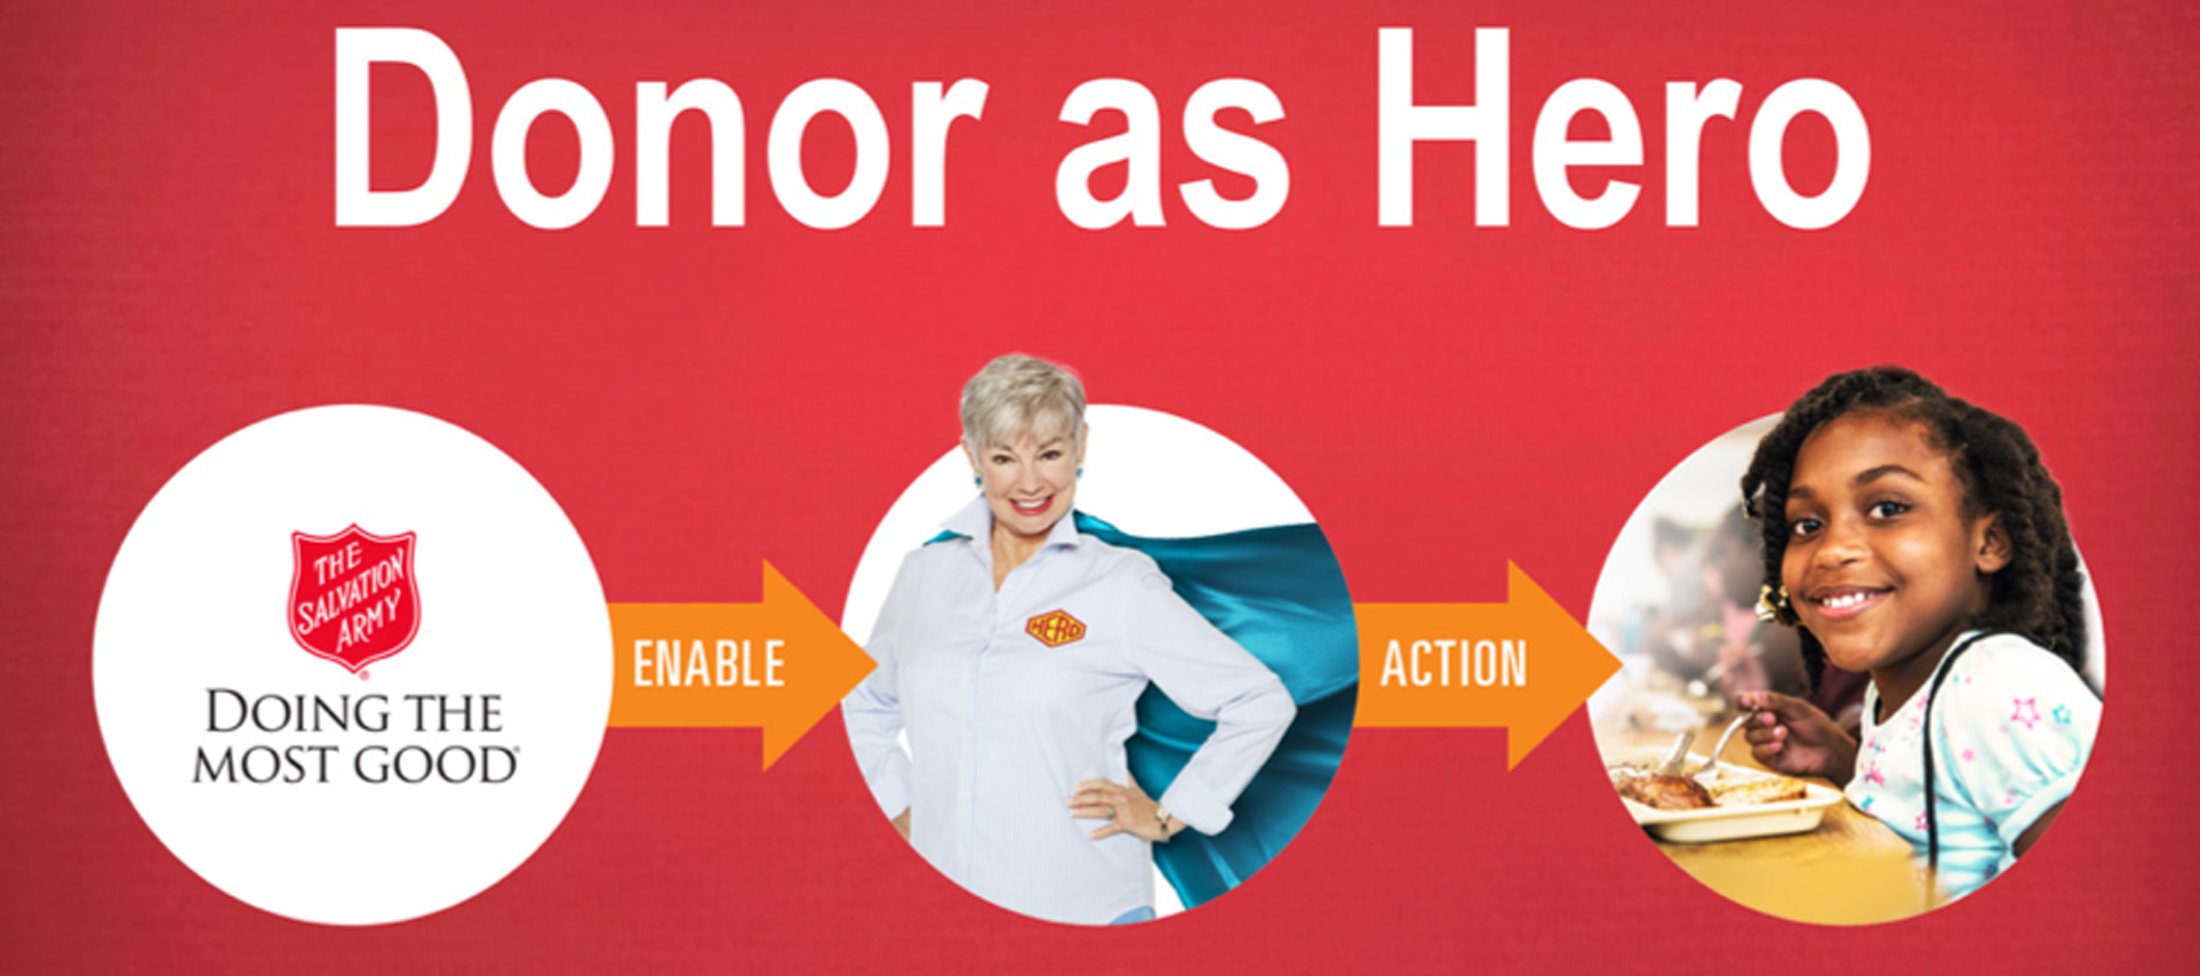 the-ringer-fundraising-blog-featured-image-donor-as-hero-creative